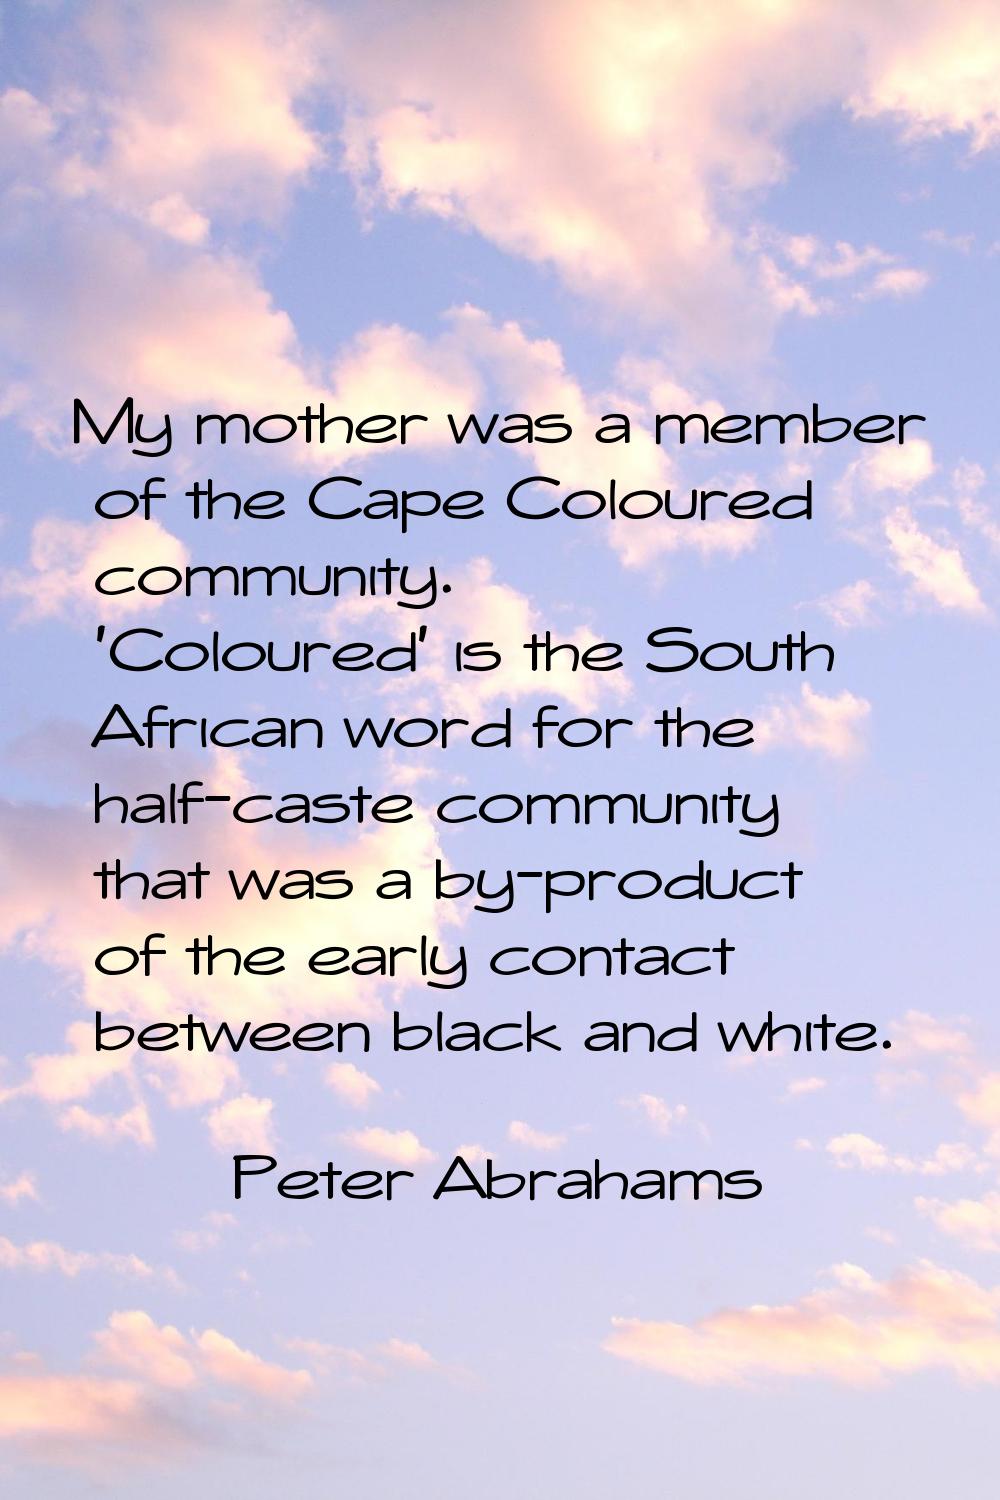 My mother was a member of the Cape Coloured community. 'Coloured' is the South African word for the